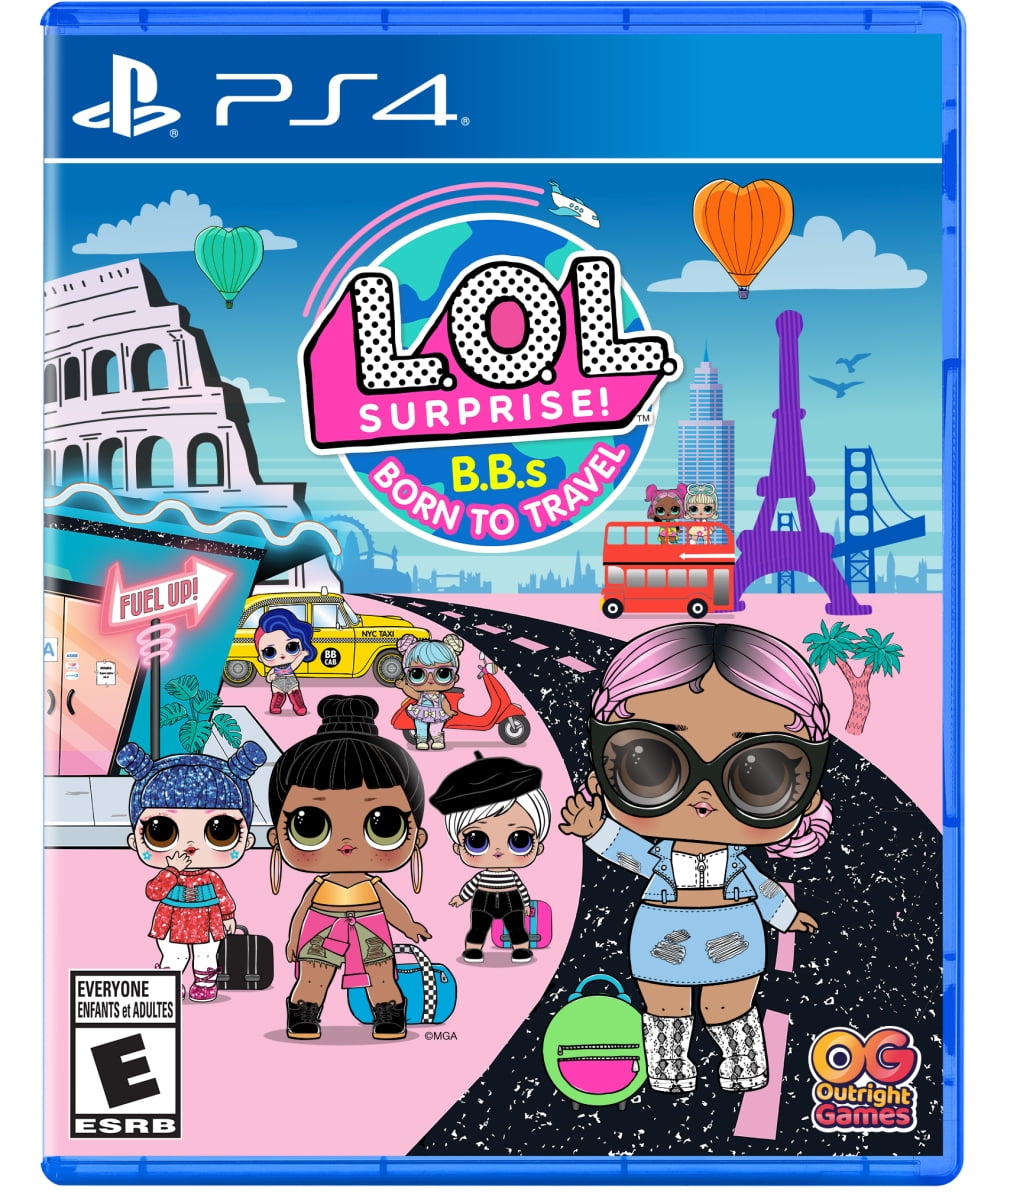 819338022291 SURPRISE! L.O.L. 4, Travel, to B.B.s Born Games, Outright PlayStation